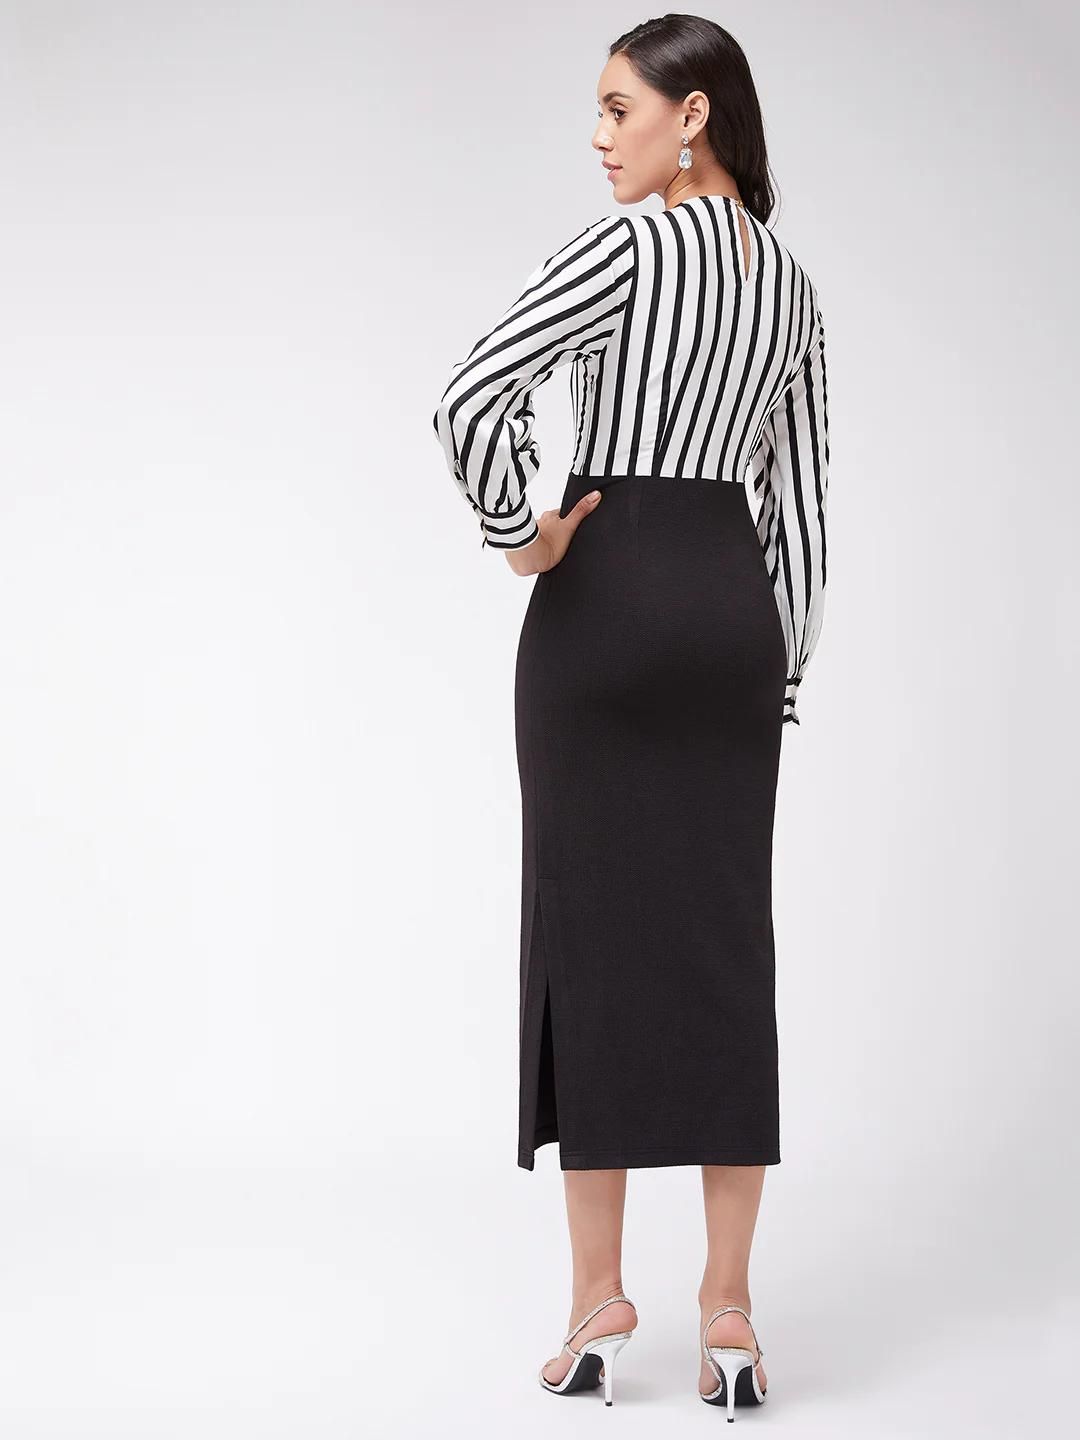 PANNKH Monocromatic Stripe Fitted Dress